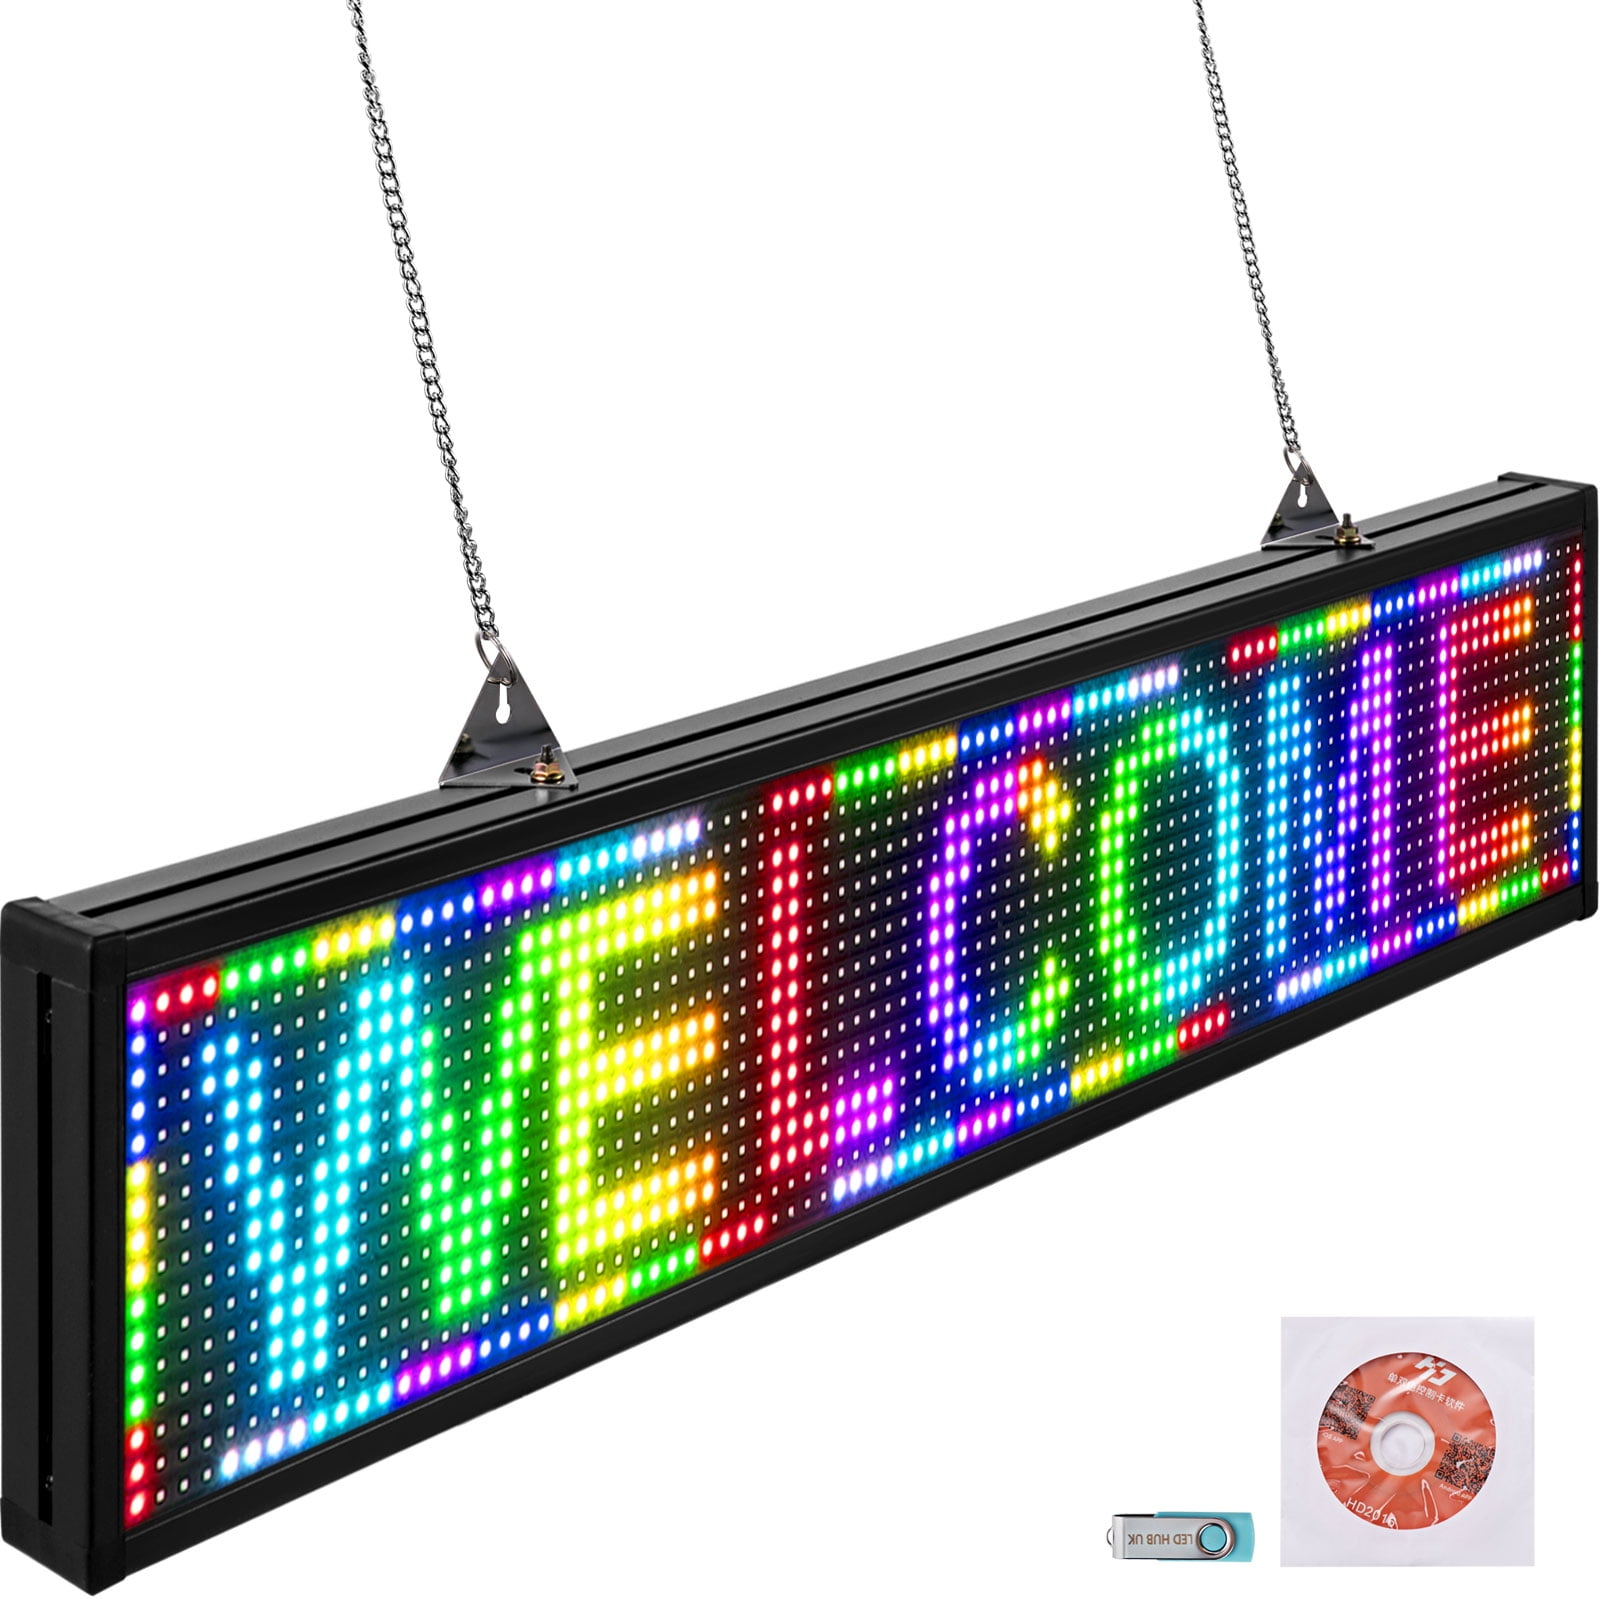 New Wifi Hot Spot Neon Sign 20"x16" Light Lamp Store Wall Bar Collection ST383 